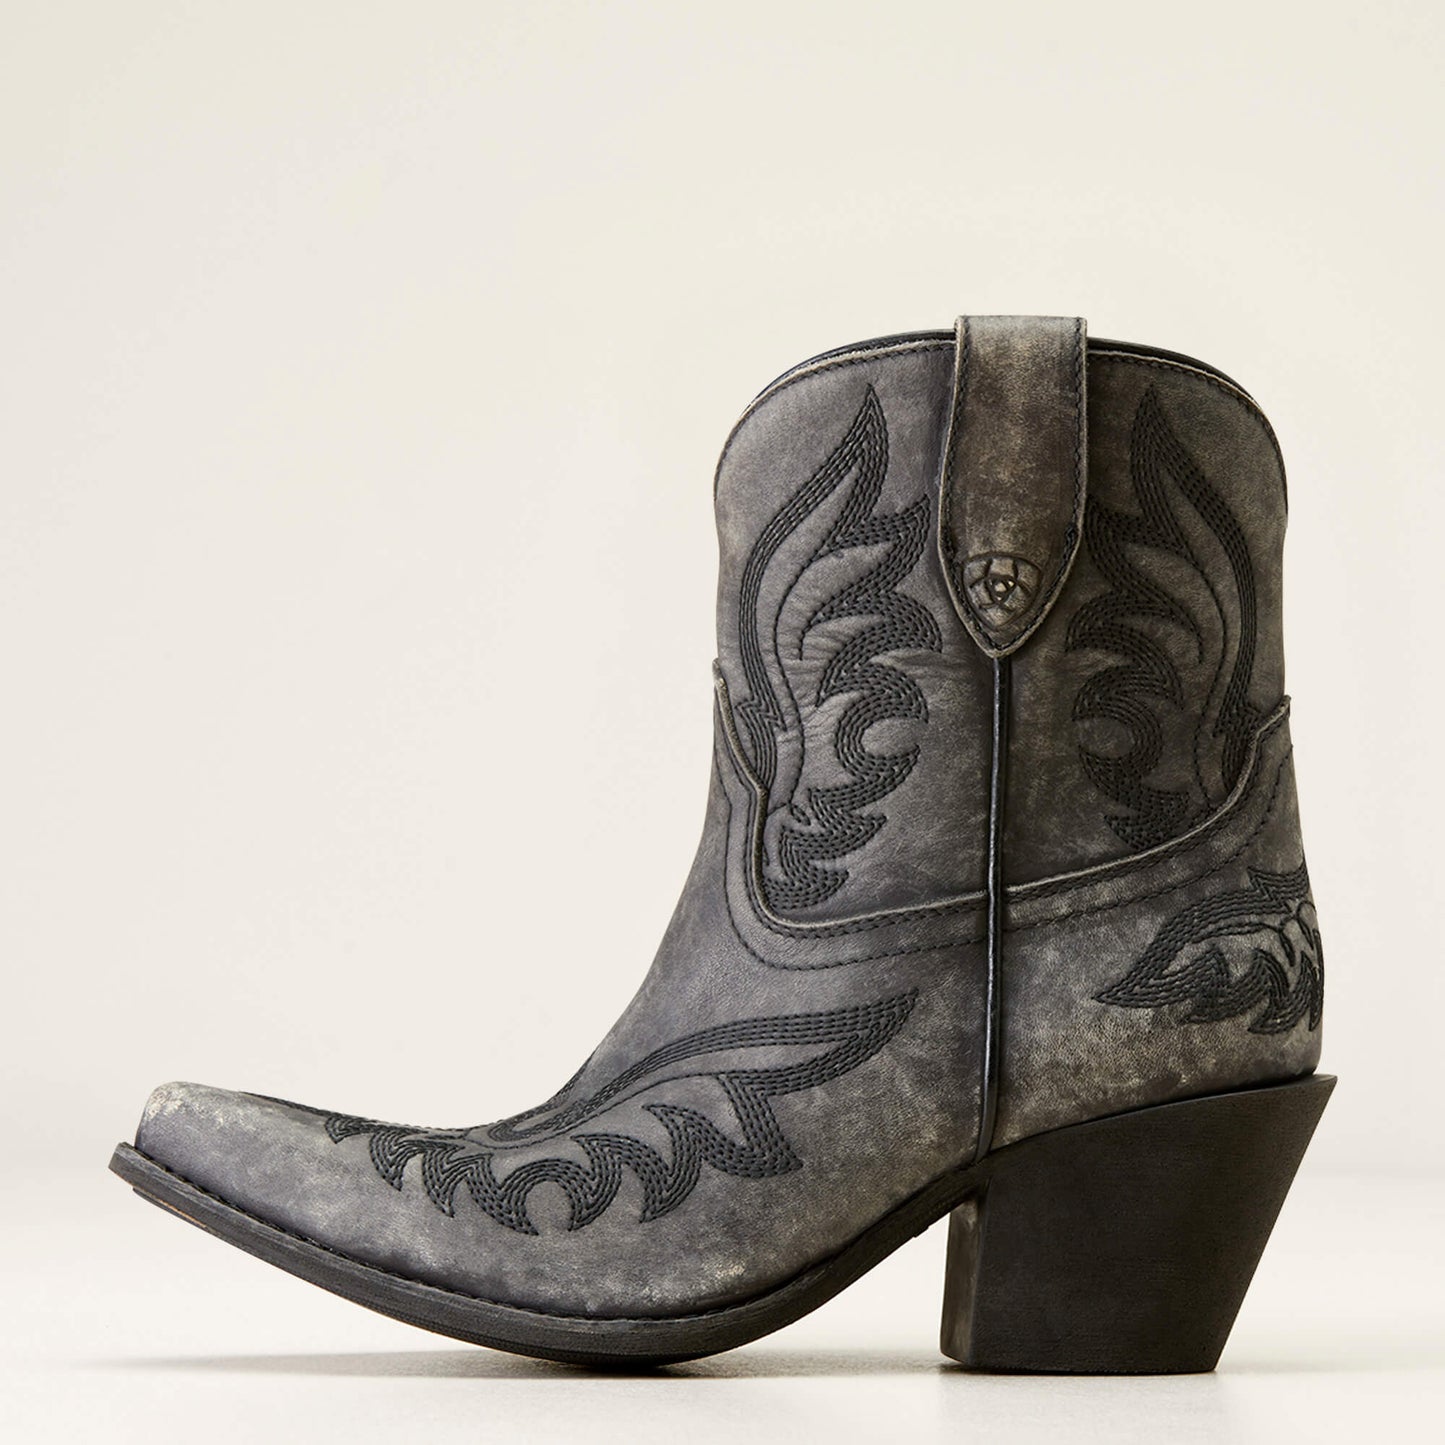 The Ariat Chandler Western Boot - Distressed Black